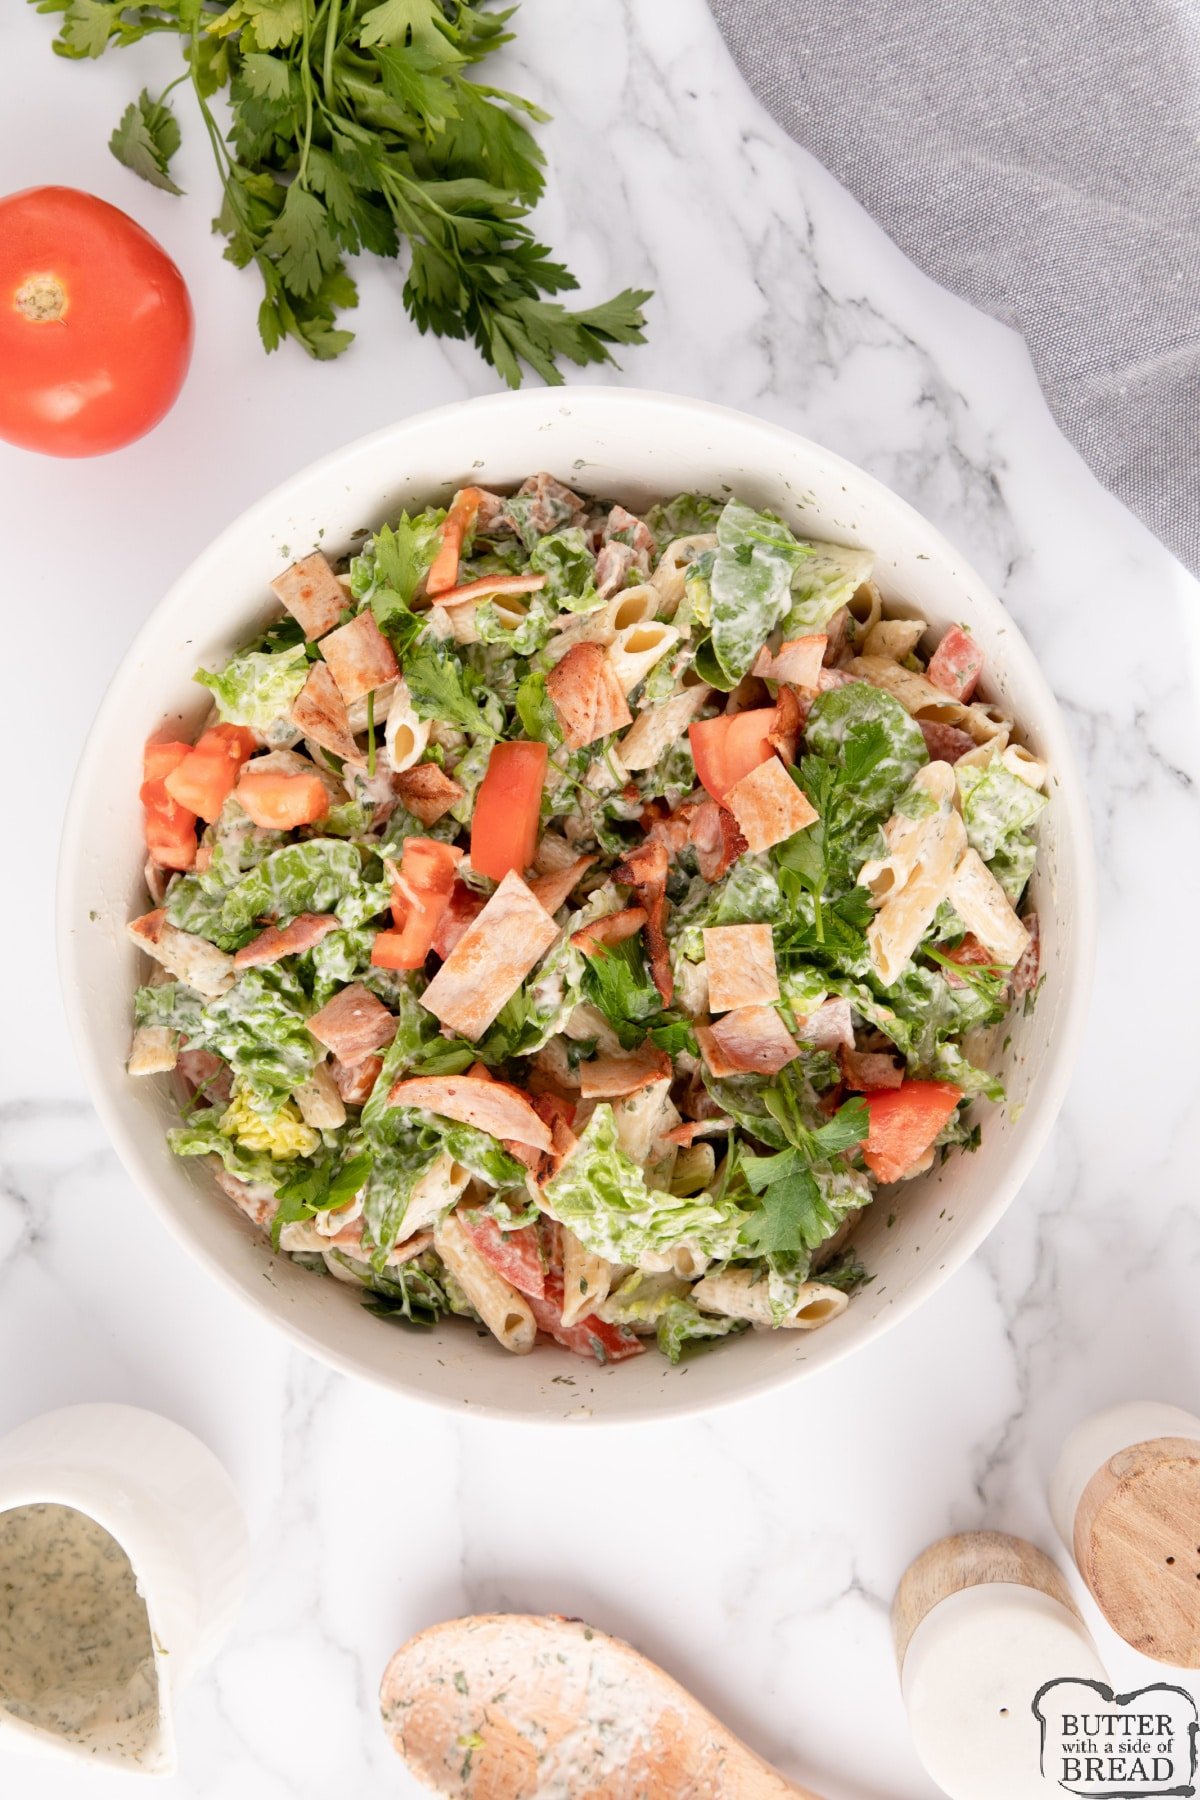 Pasta salad with bacon, lettuce and tomatoes in a creamy ranch dressing